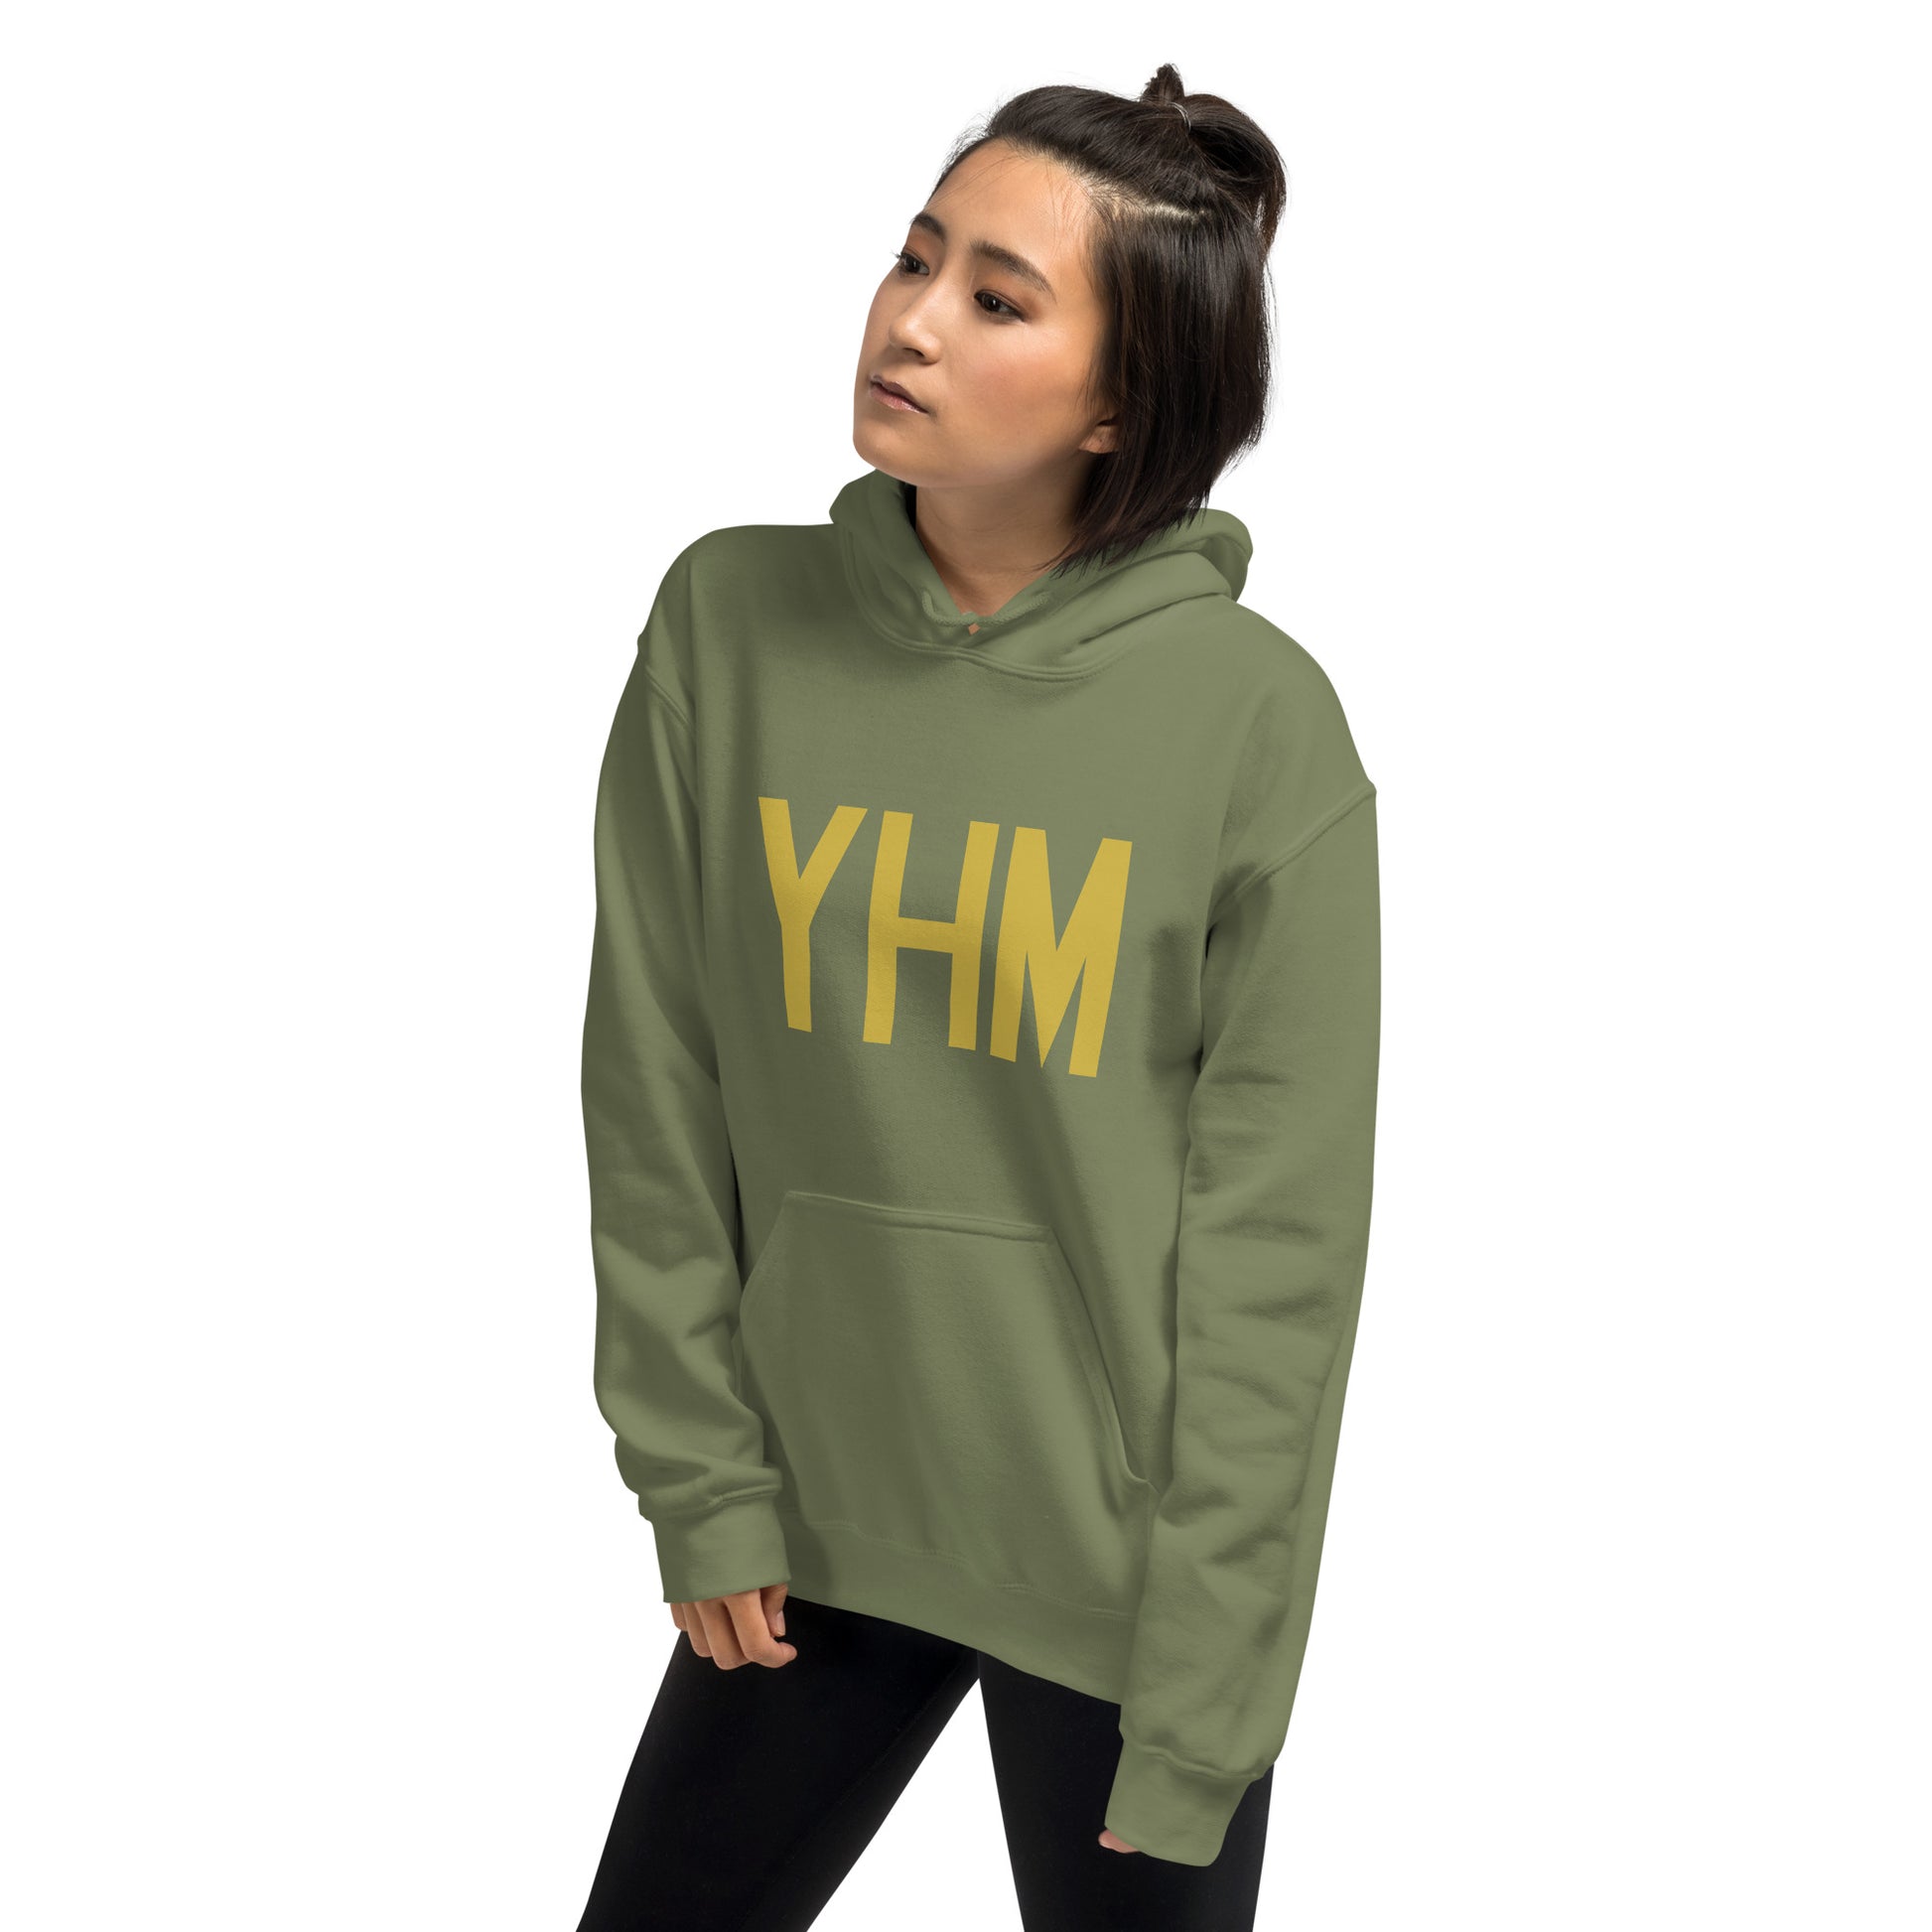 Aviation Gift Unisex Hoodie - Old Gold Graphic • YHM Hamilton • YHM Designs - Image 10